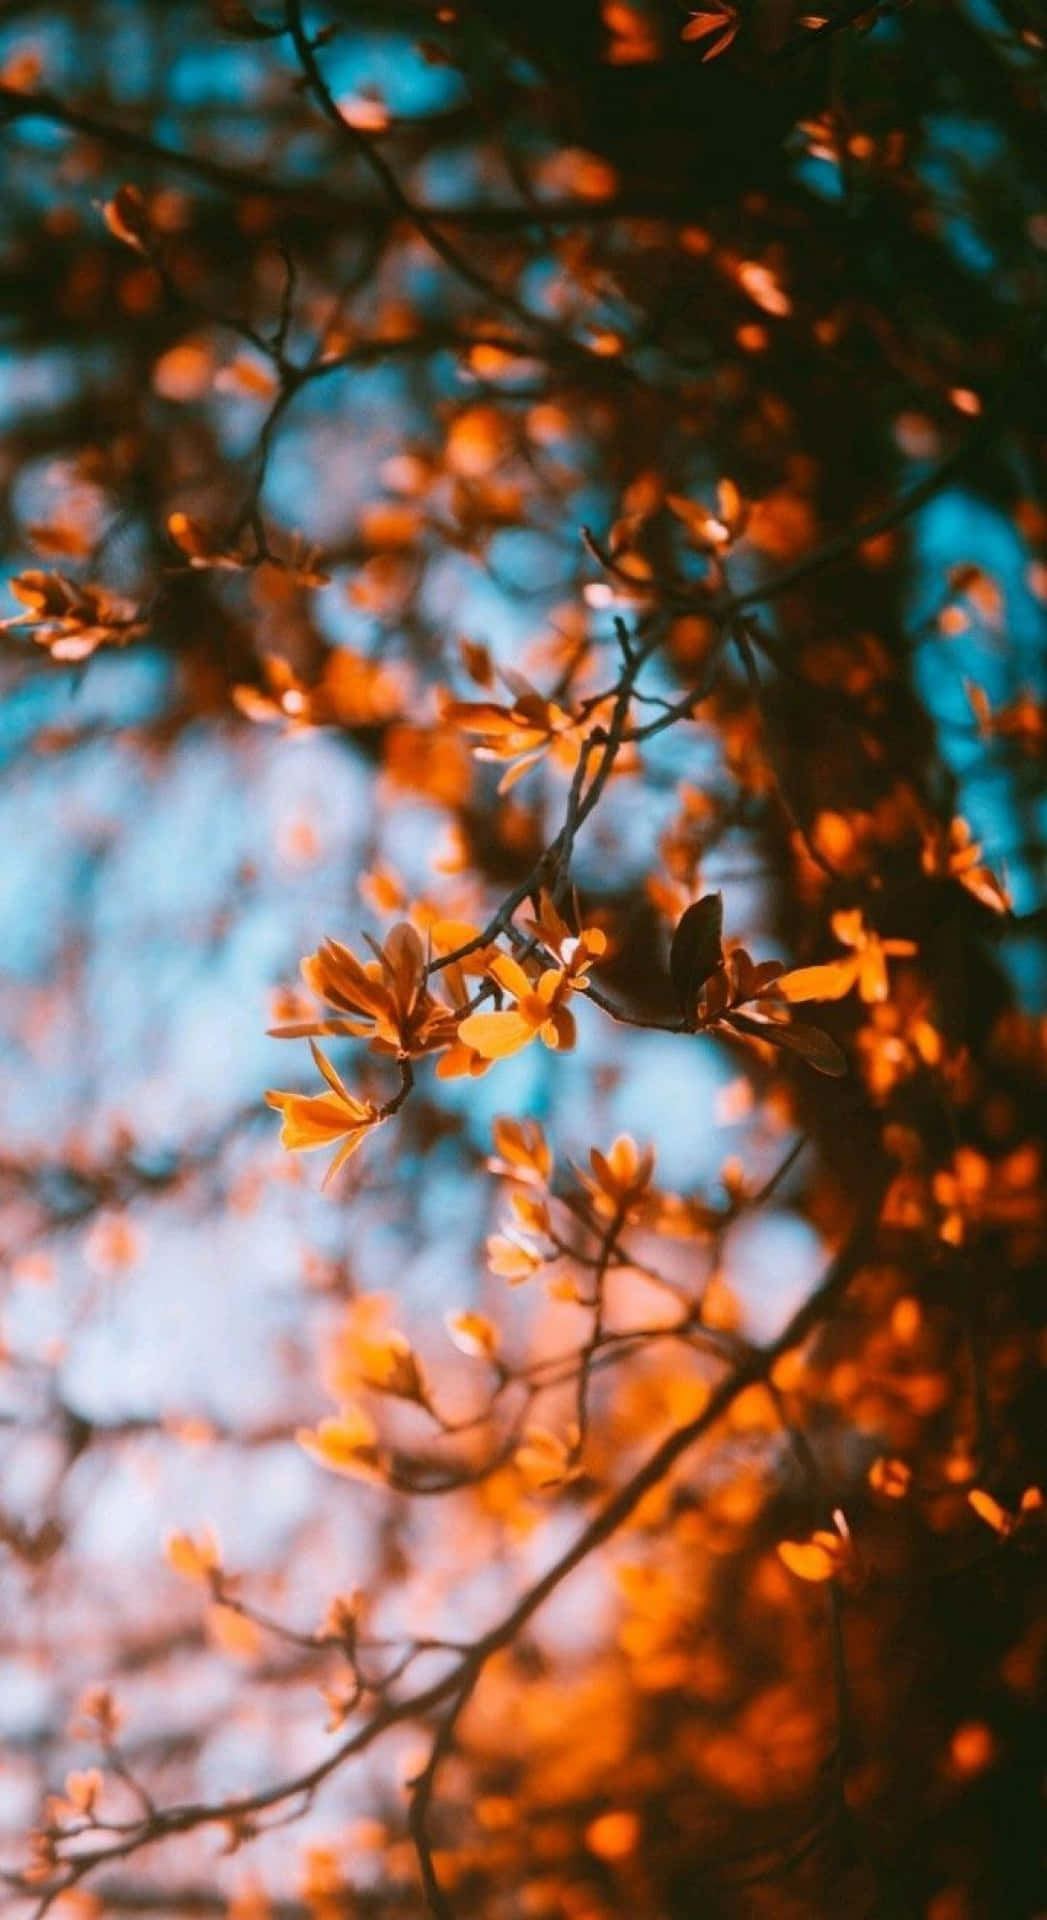 A Blurry Image Of A Tree With Leaves